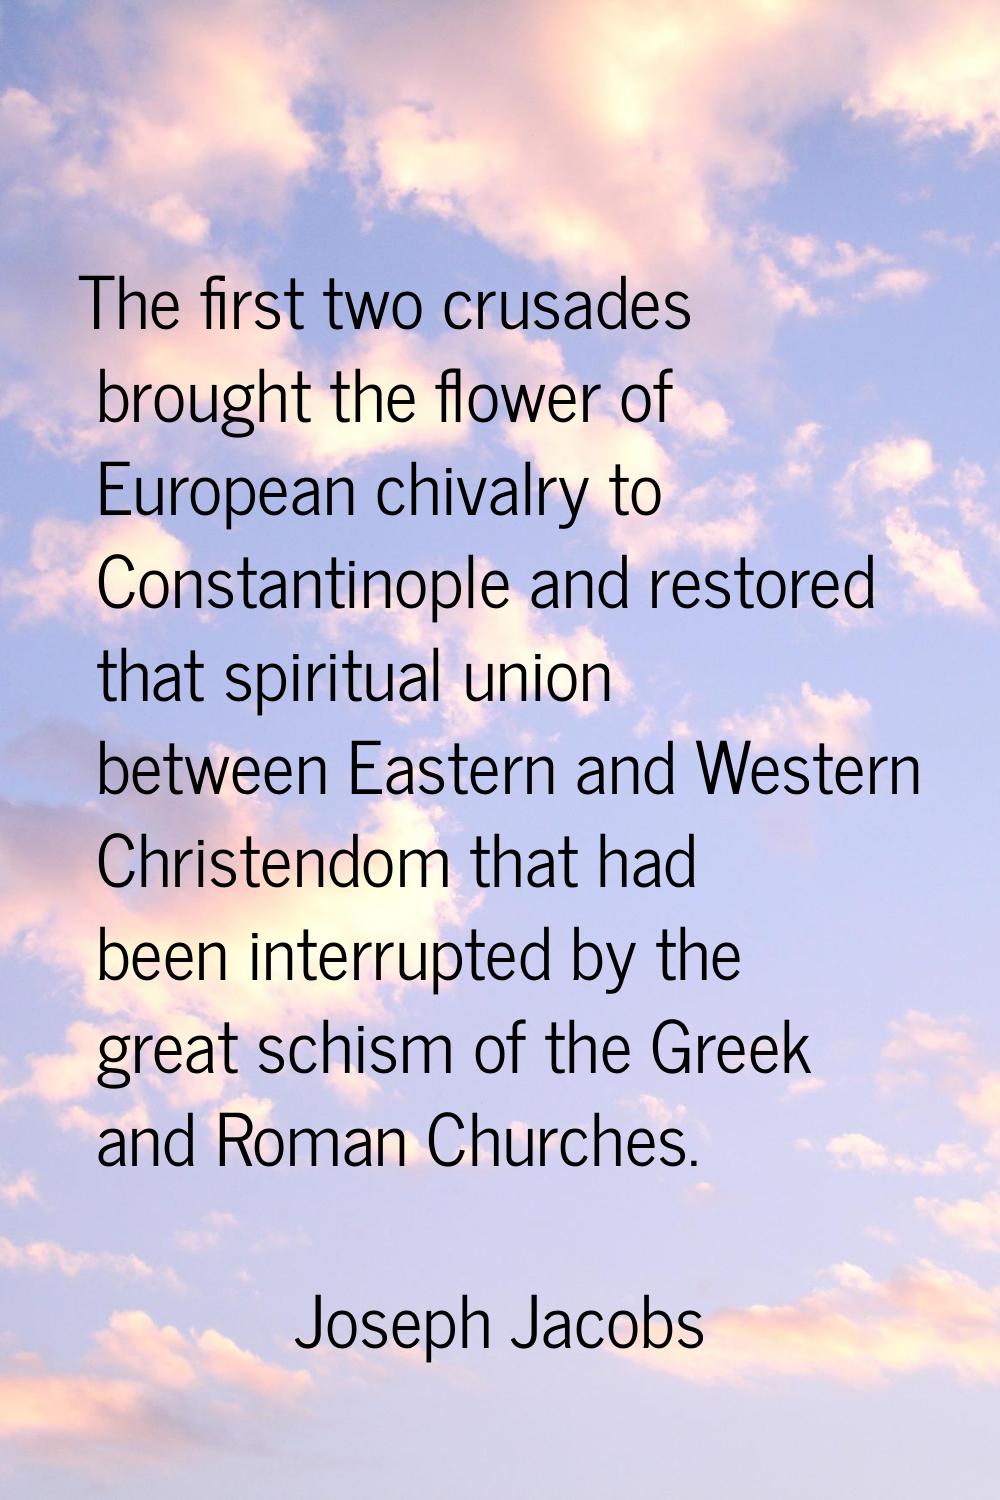 The first two crusades brought the flower of European chivalry to Constantinople and restored that 